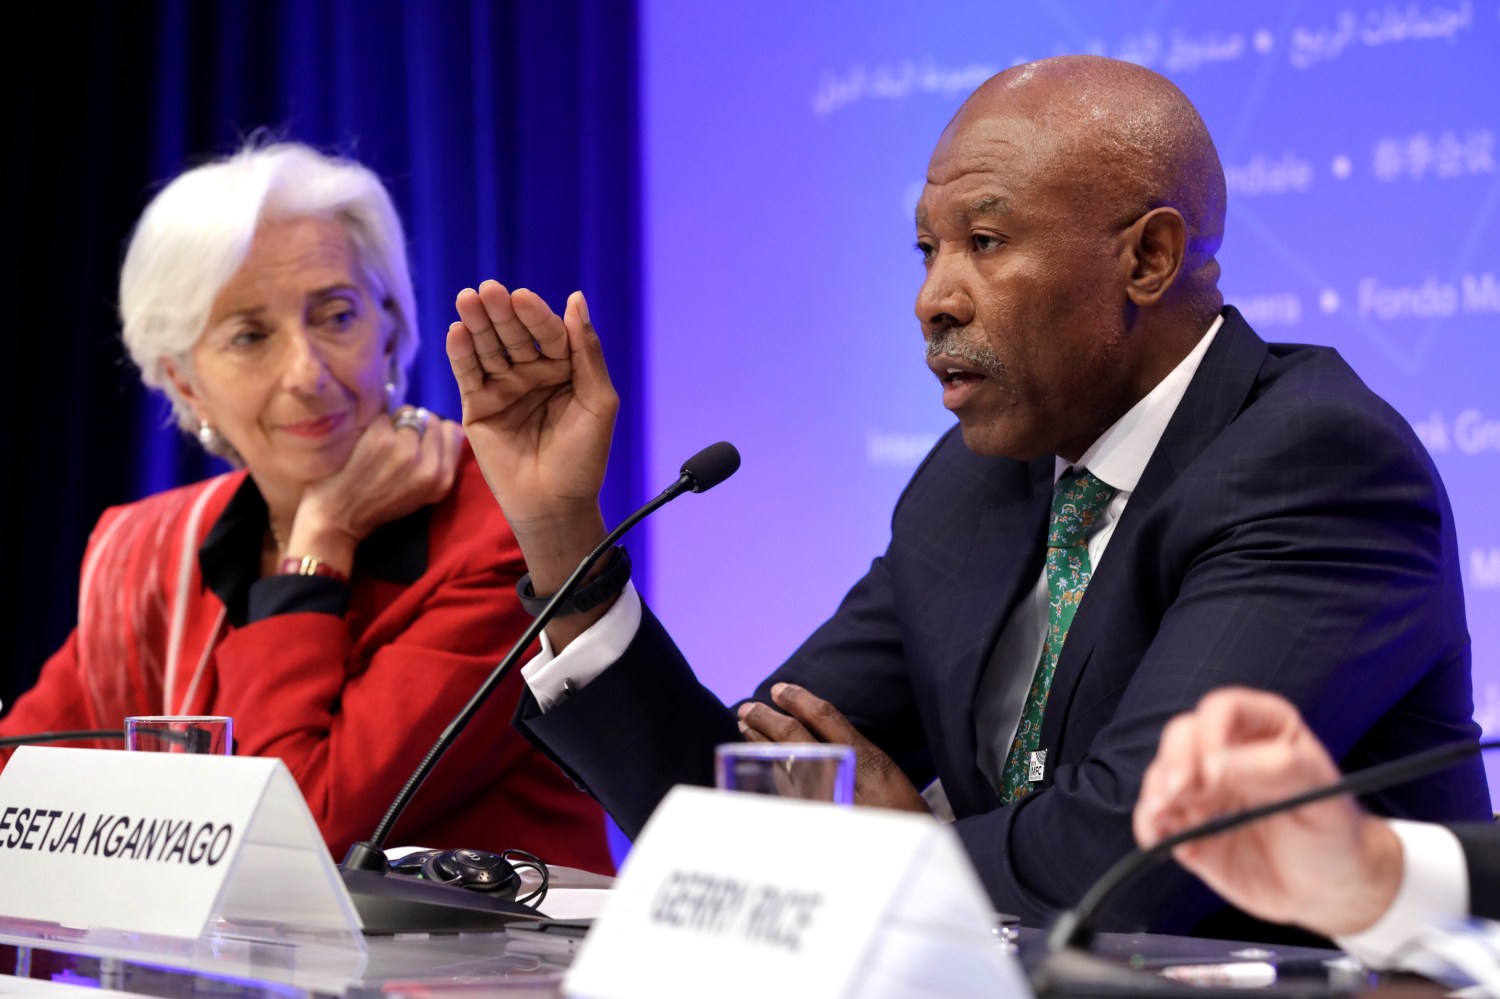 South African Reserve Bank Governor Lesetja Kganyago speaks at IMFC joint press conference with International Monetary Fund (IMF) Managing Director Christine Lagarde during the IMF/World Bank spring meeting in Washington, U.S., April 21, 2018. REUTERS/Yuri Gripas - RC1983EAB0E0